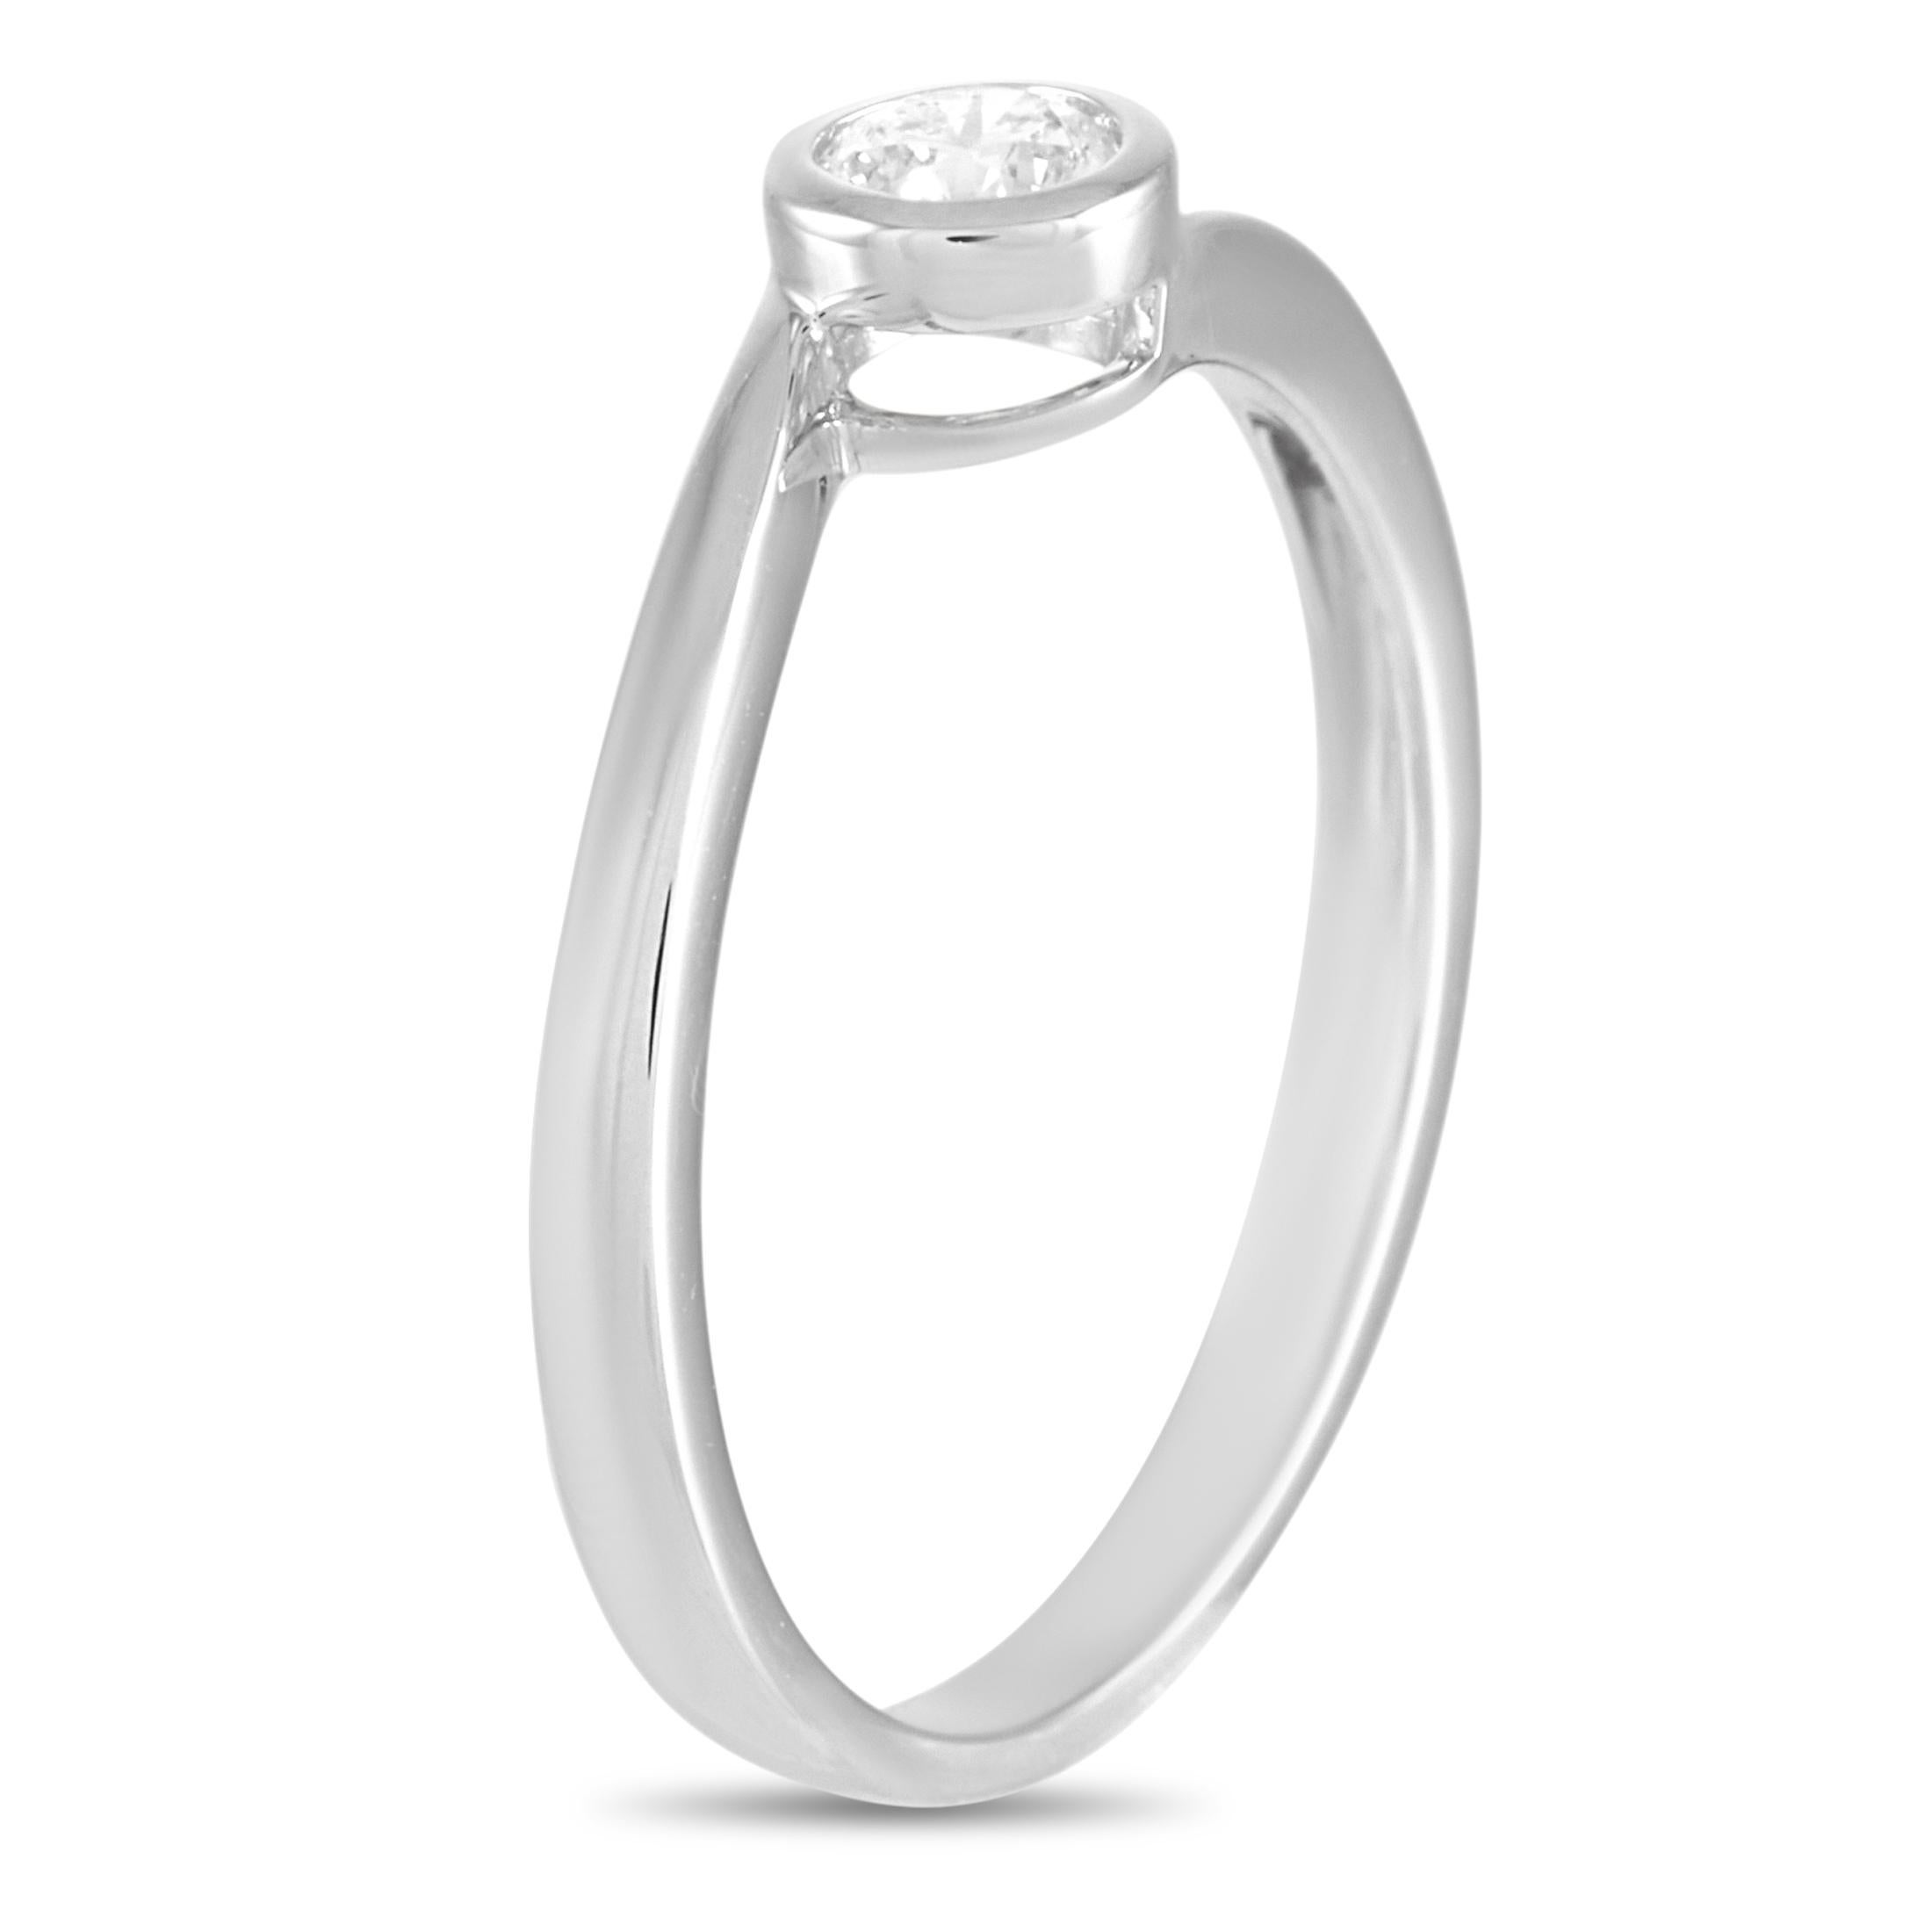 This LB Exclusive ring is crafted from 14K white gold and weighs 1.7 grams. It boasts band thickness of 2 mm and top height of 4 mm, while top dimensions measure 4 by 4 mm. The ring is set with a 0.22 ct diamond stone.
 
 Offered in brand new